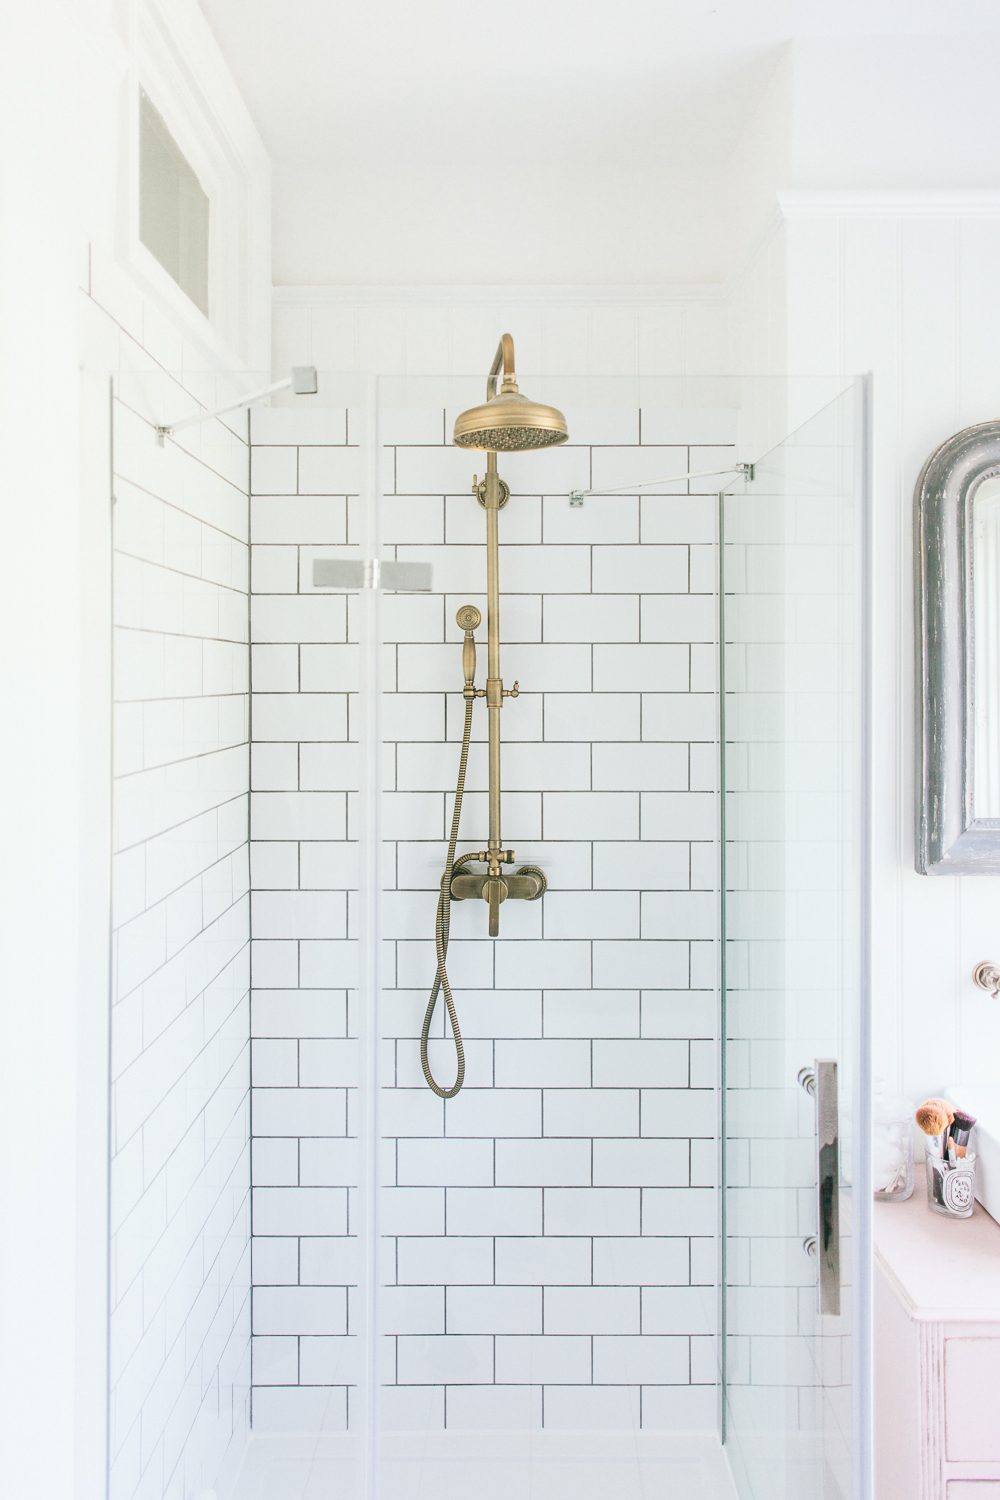 Antique brass shower head and metro tiles